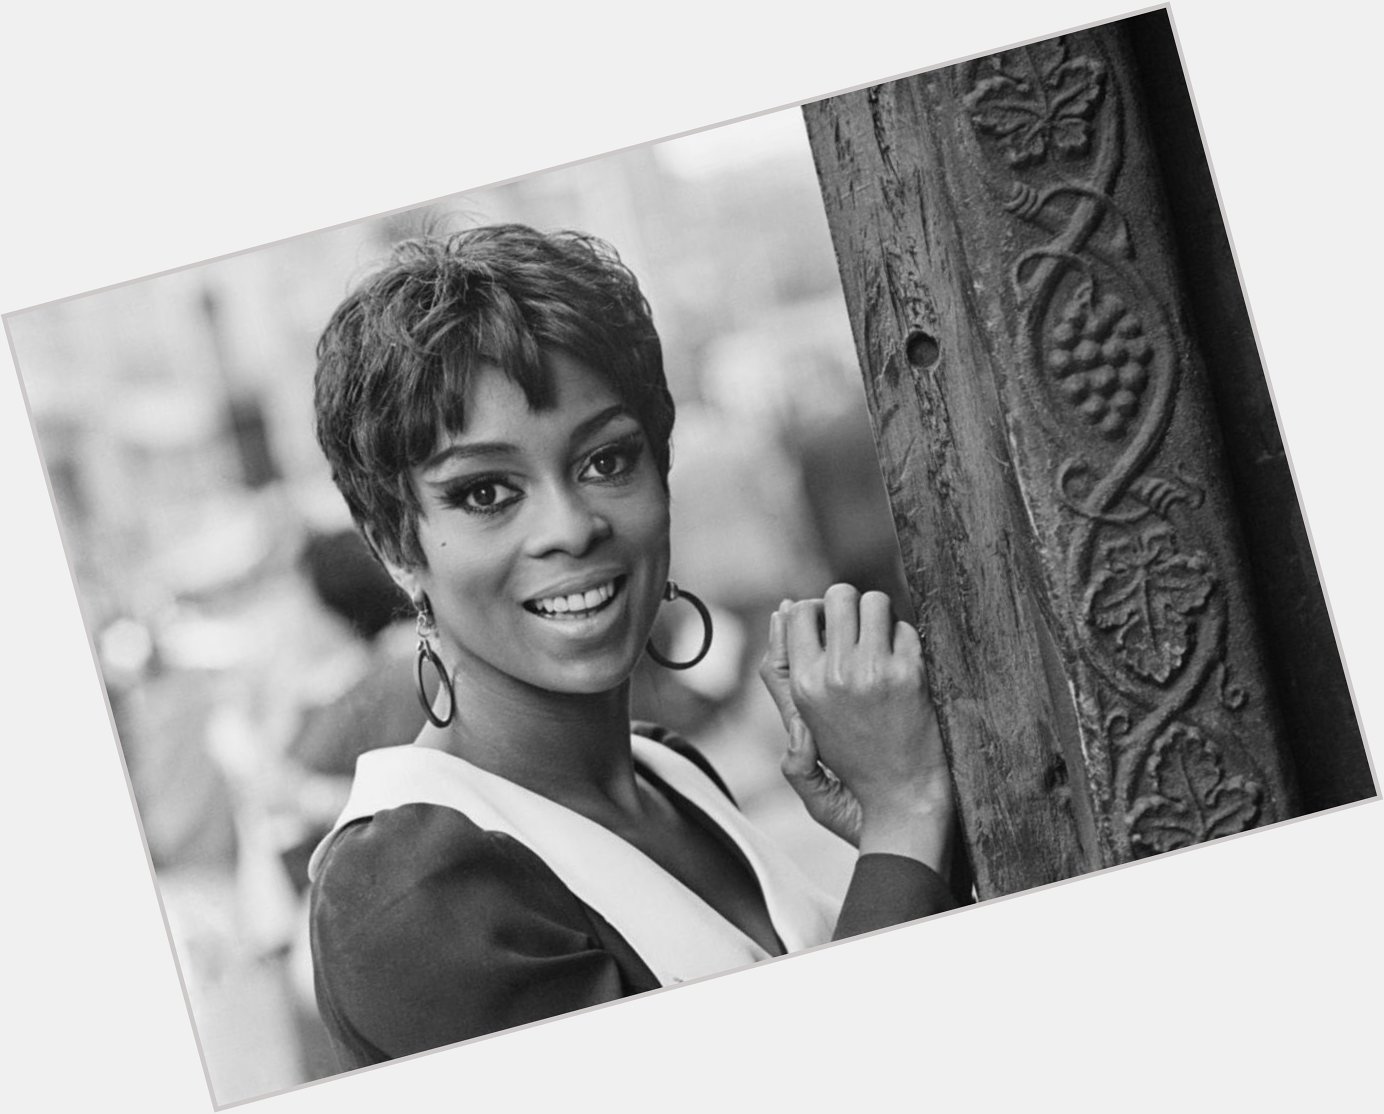 Happy Belated Birthday to the one and only Lola Falana! 